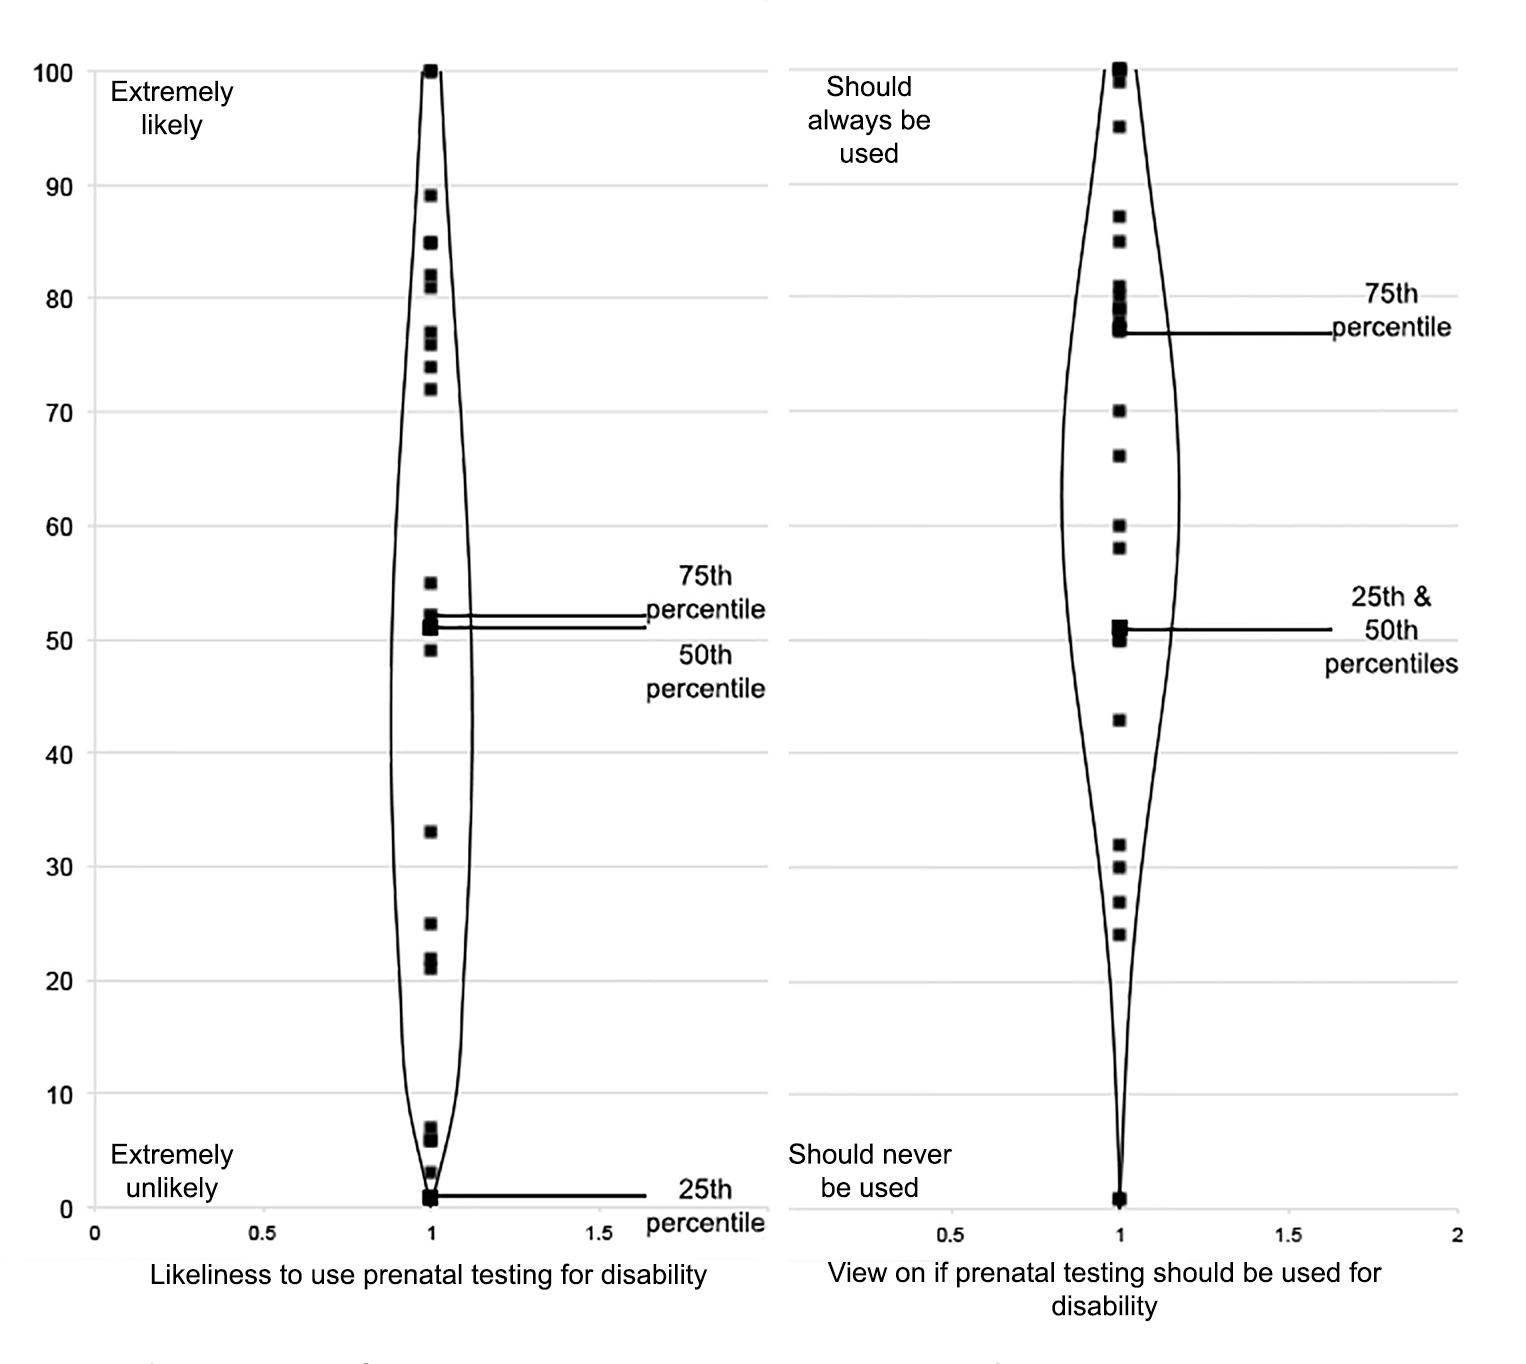 Image showing two bean plot charts, the first labelled 'Likeliness to use prenatal testing for disability' and the second labelled 'View on if prenatal testing should be used for disability